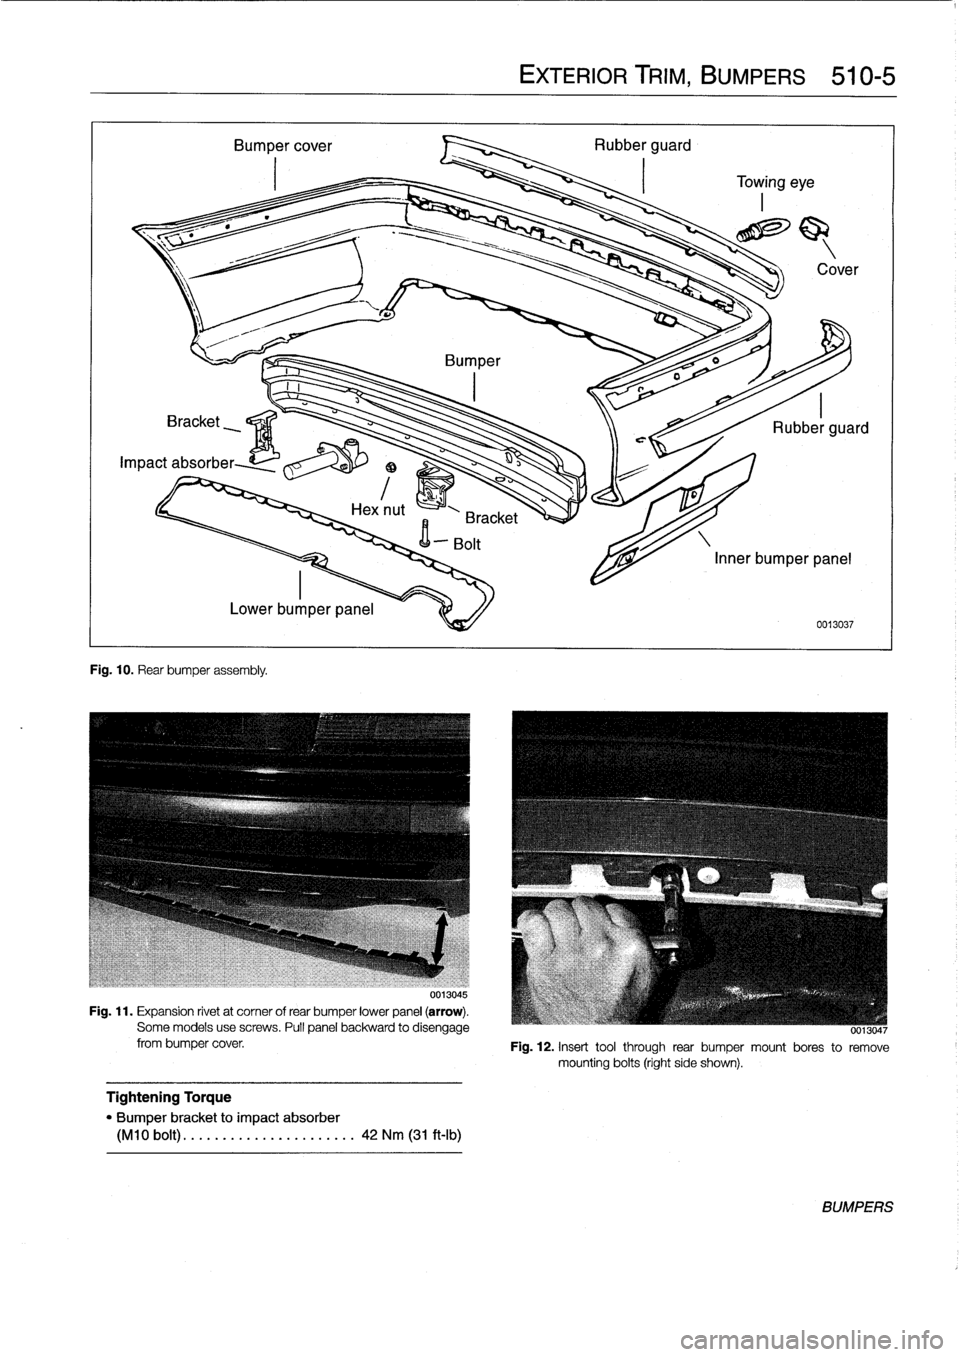 BMW 323i 1993 E36 Service Manual 
Fig
.
10
.
Rear
bumper
assembly
.

0013045

Fig
.
11
.
Expansion
rivet
at
corner
of
rear
bumper
lower
panel
(arrow)
.
Some
models
usescrews
.
Pull
panel
backward
to
disengage
from
bumper
cover
.

Tig